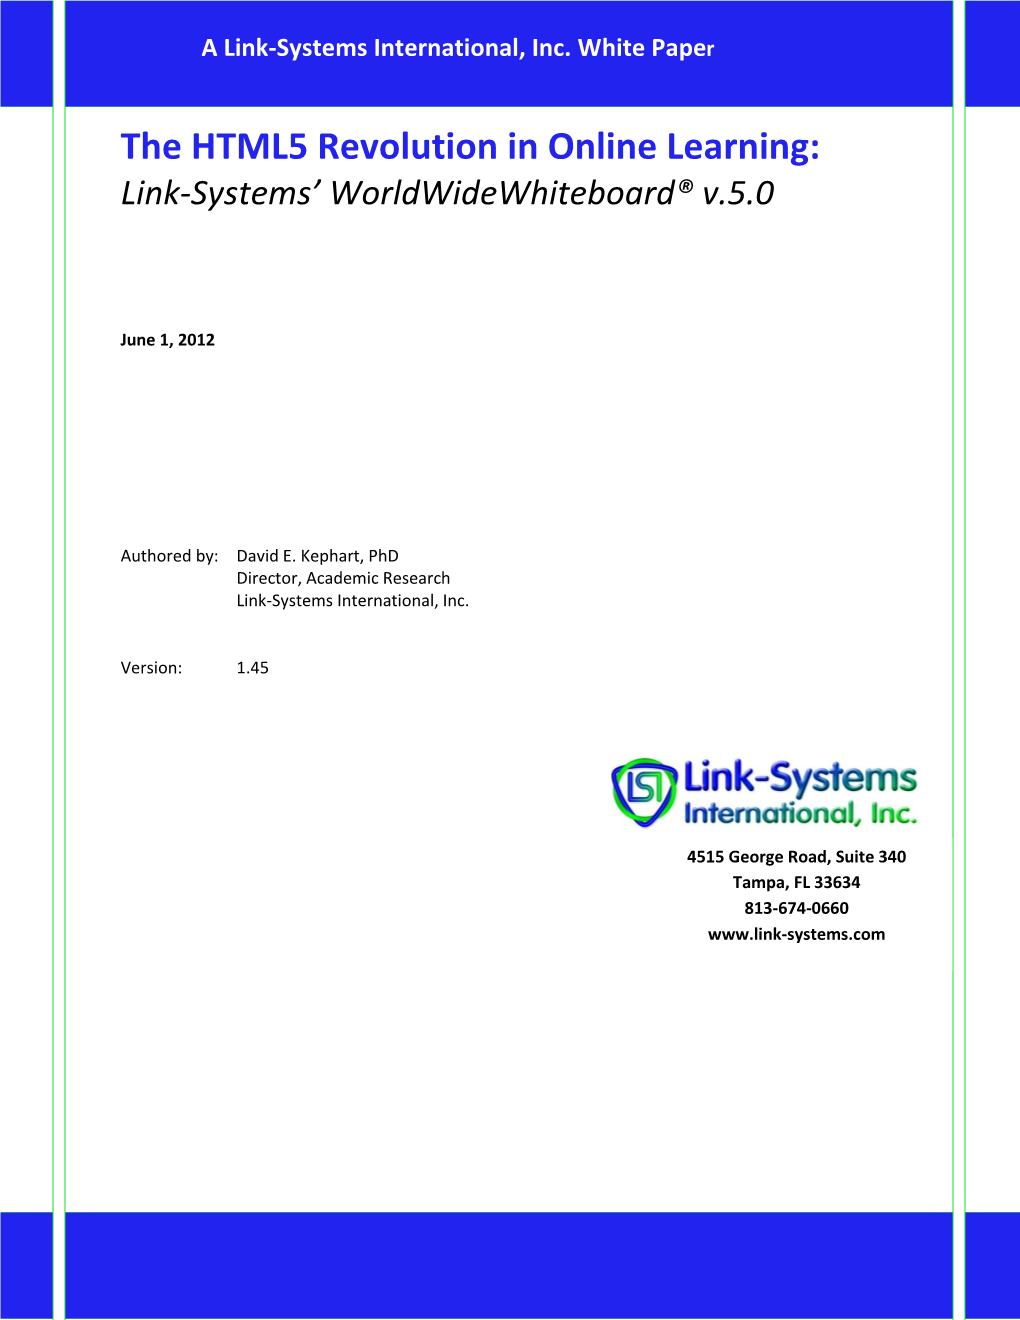 The HTML5 Revolution in Online Learning:Link-Systems’ Worldwidewhiteboard® V.5.0